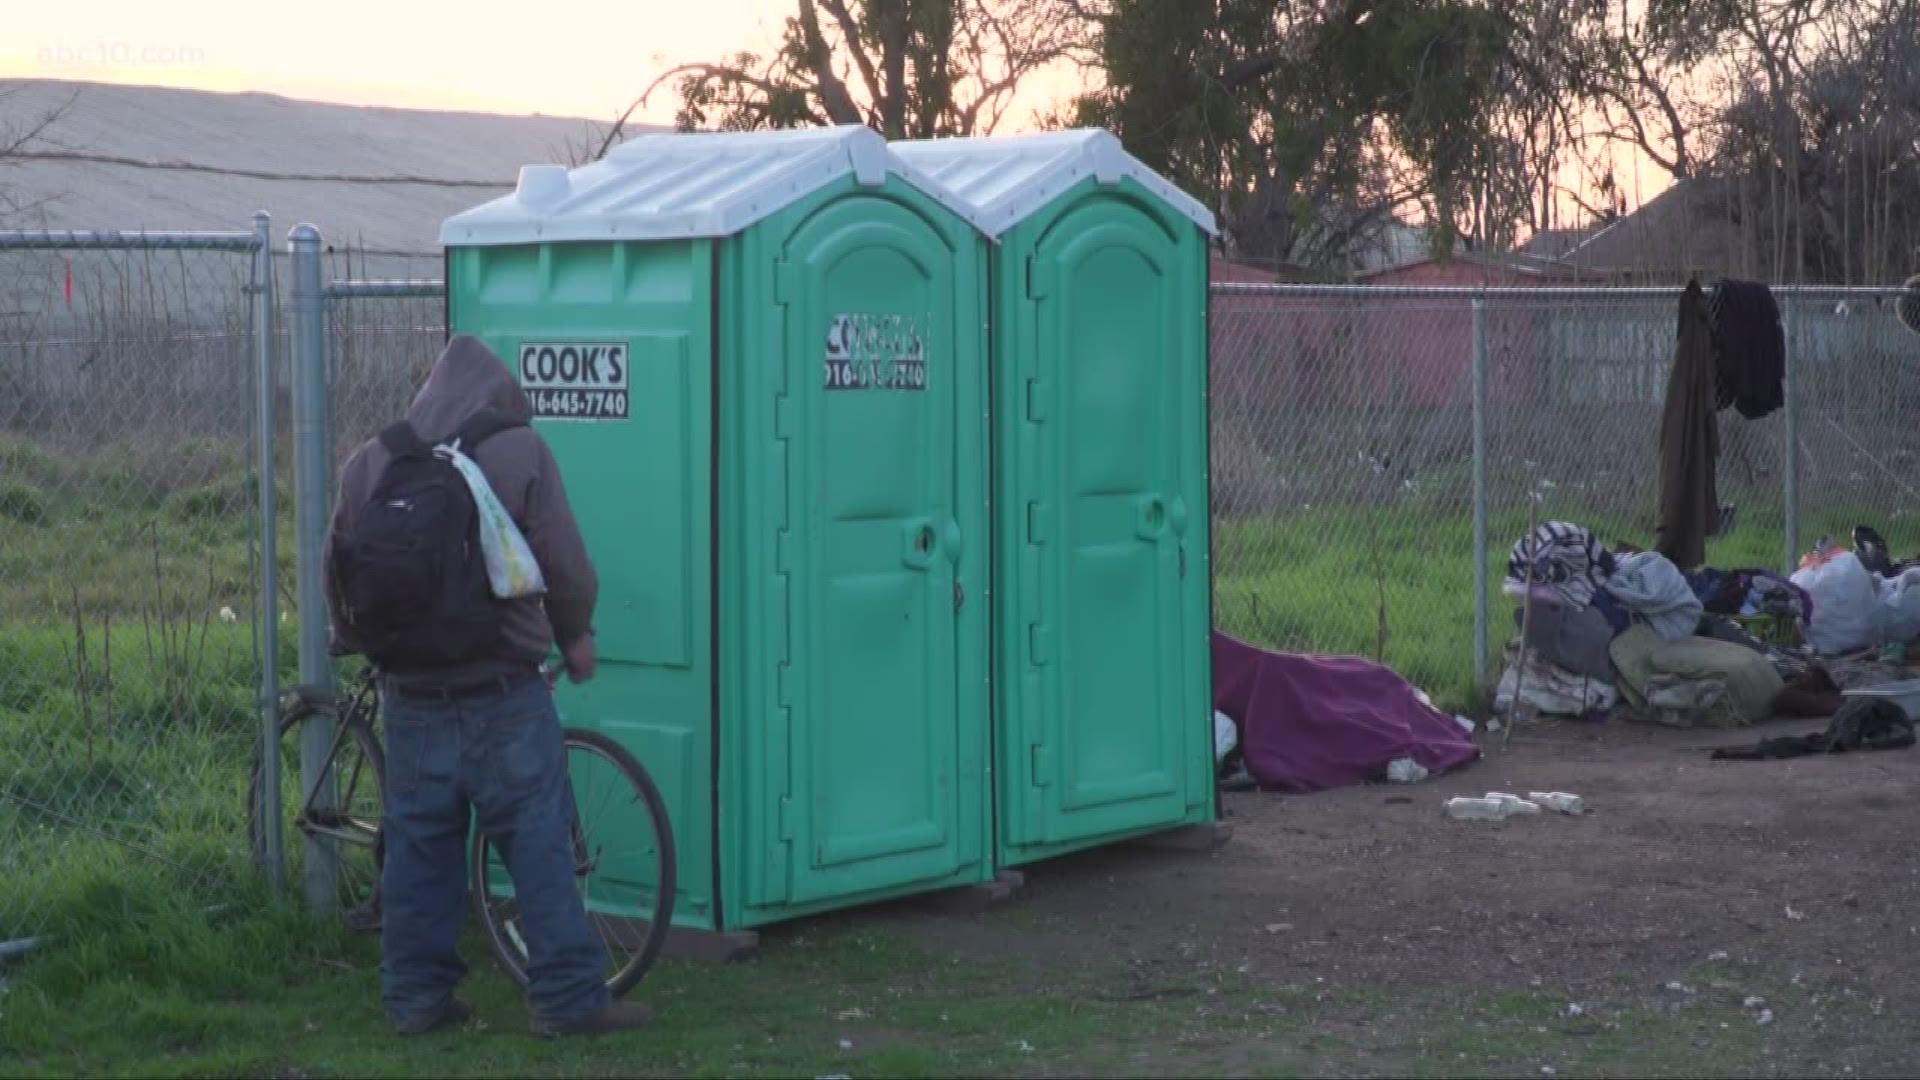 A fight over toilets is making its way to federal court after a group of homeless people filed a restraining order to prevent the city from removing porta-potties.